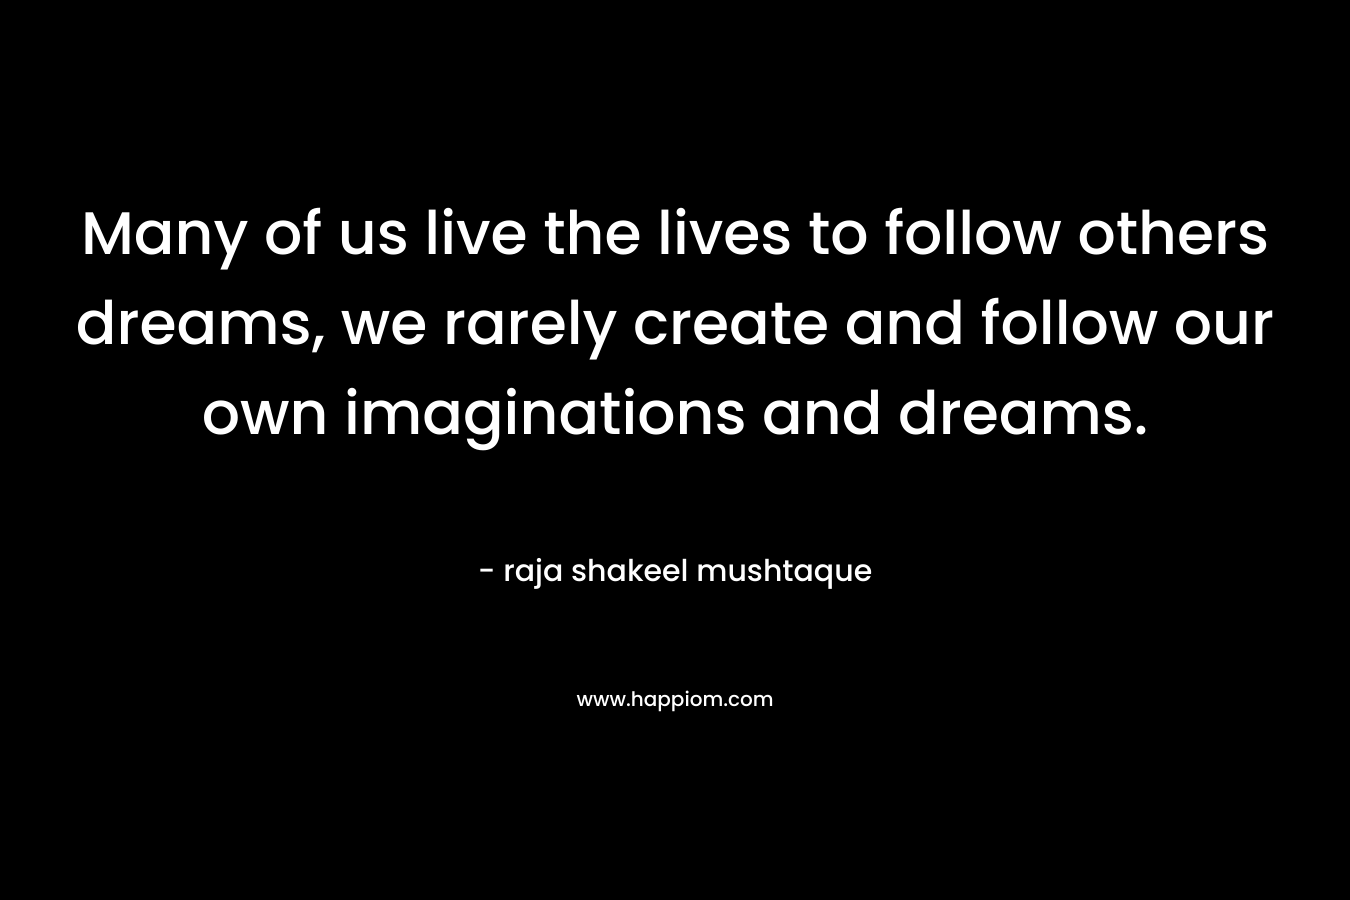 Many of us live the lives to follow others dreams, we rarely create and follow our own imaginations and dreams.